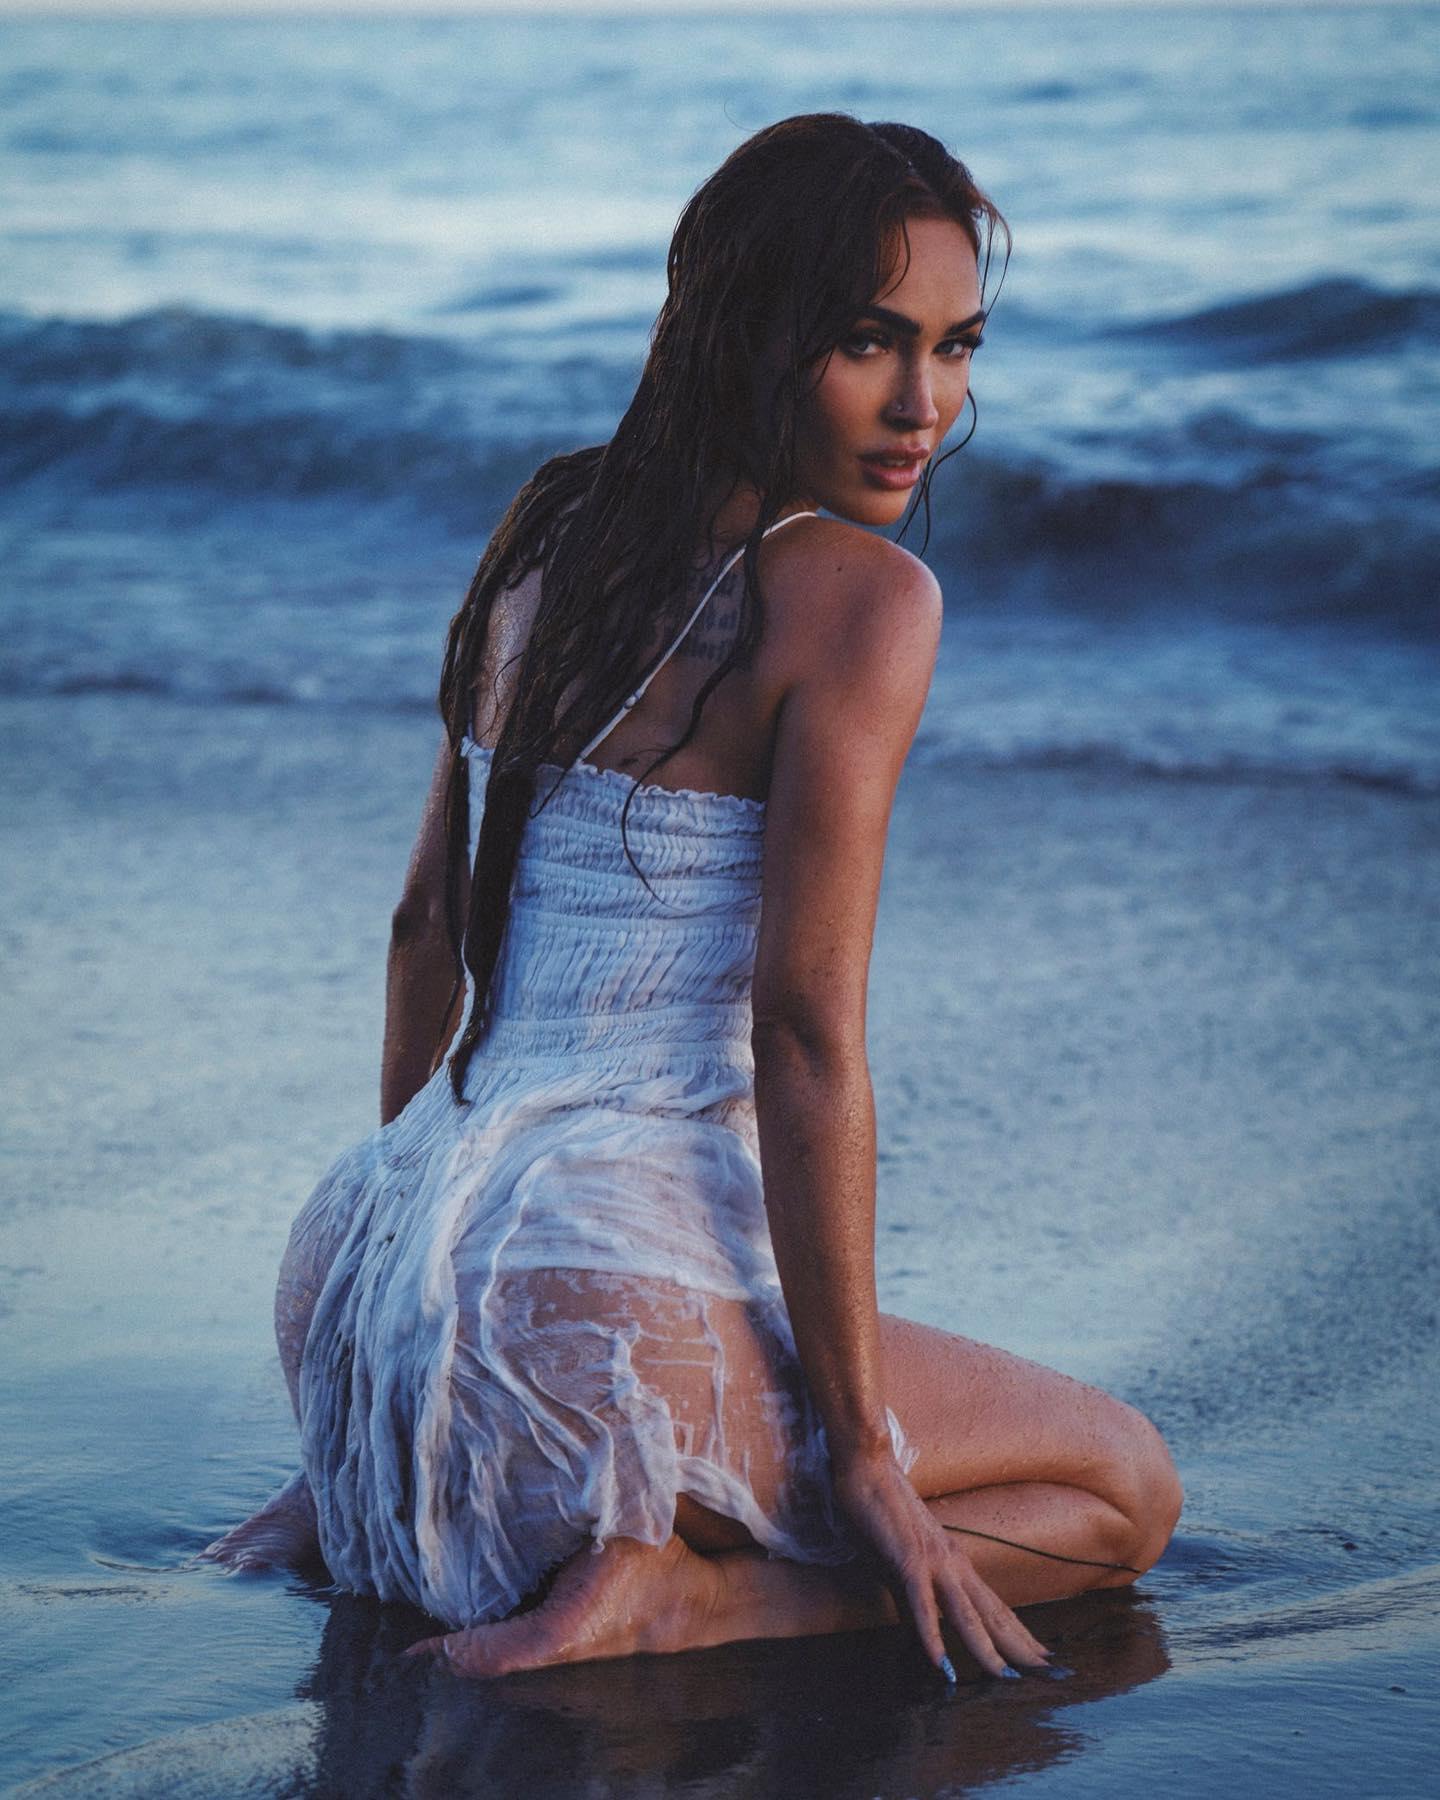 Megan Fox In Wet See-Through Dress Is ‘Offering Surf Lessons’